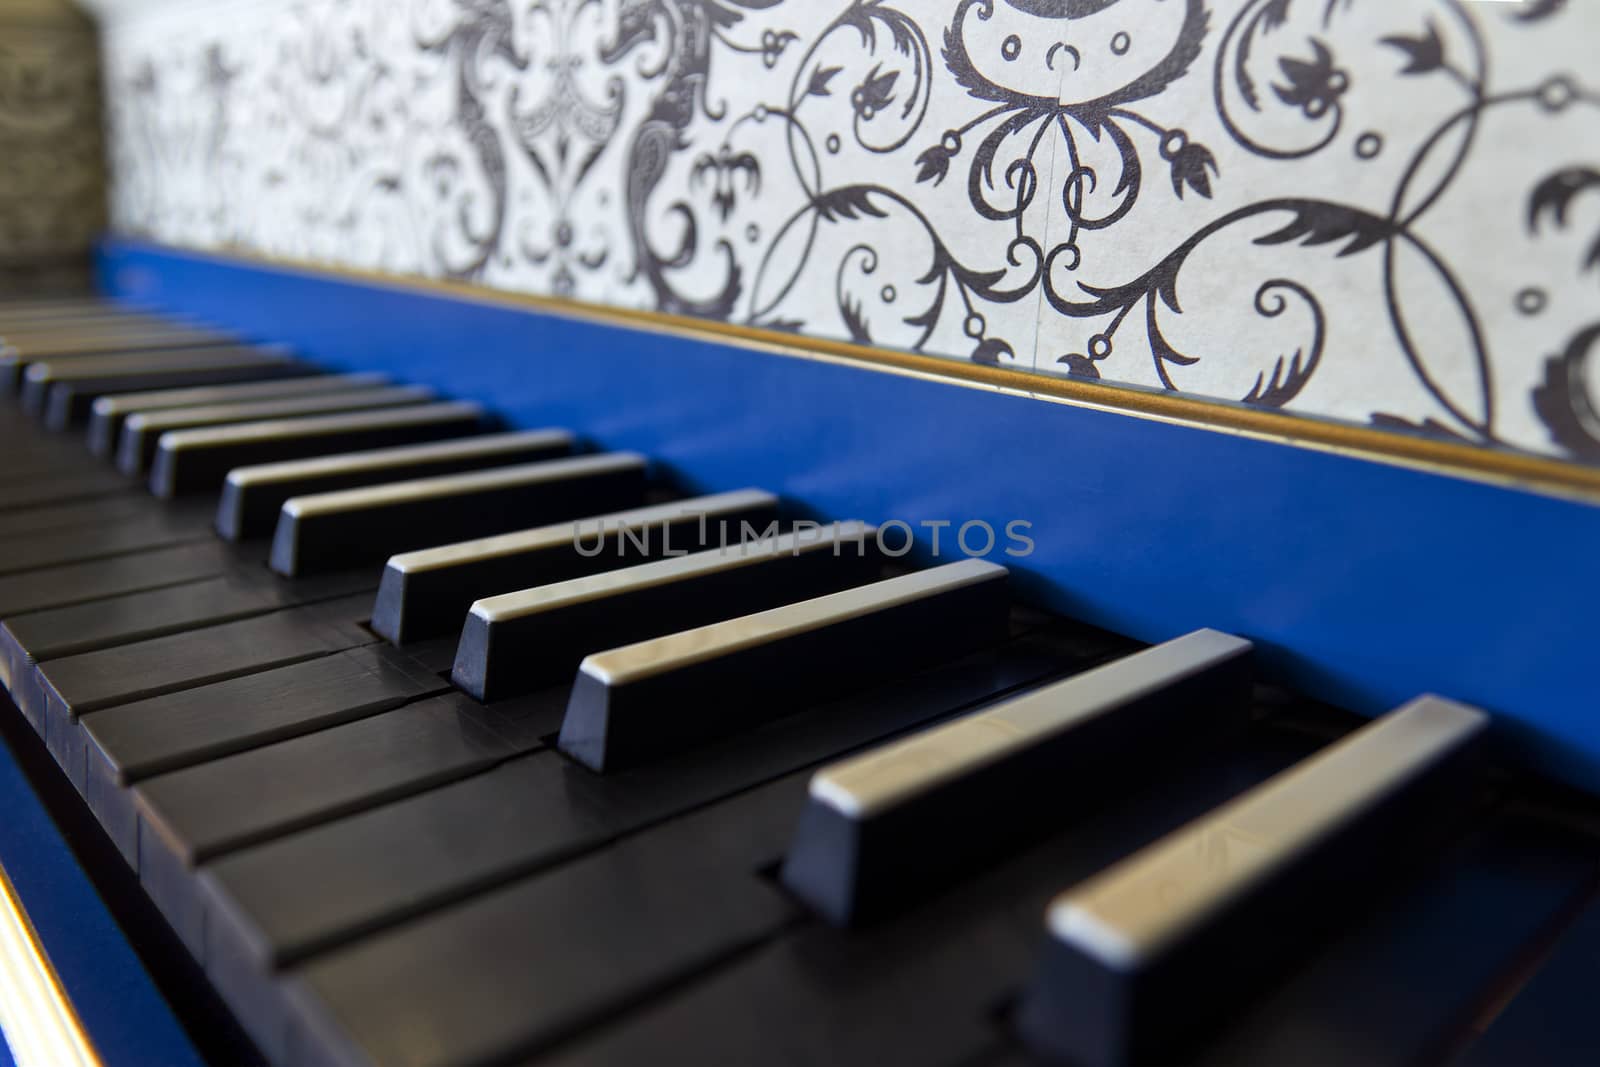 Detail of old harpsichord keyboard with black keys, close-up view